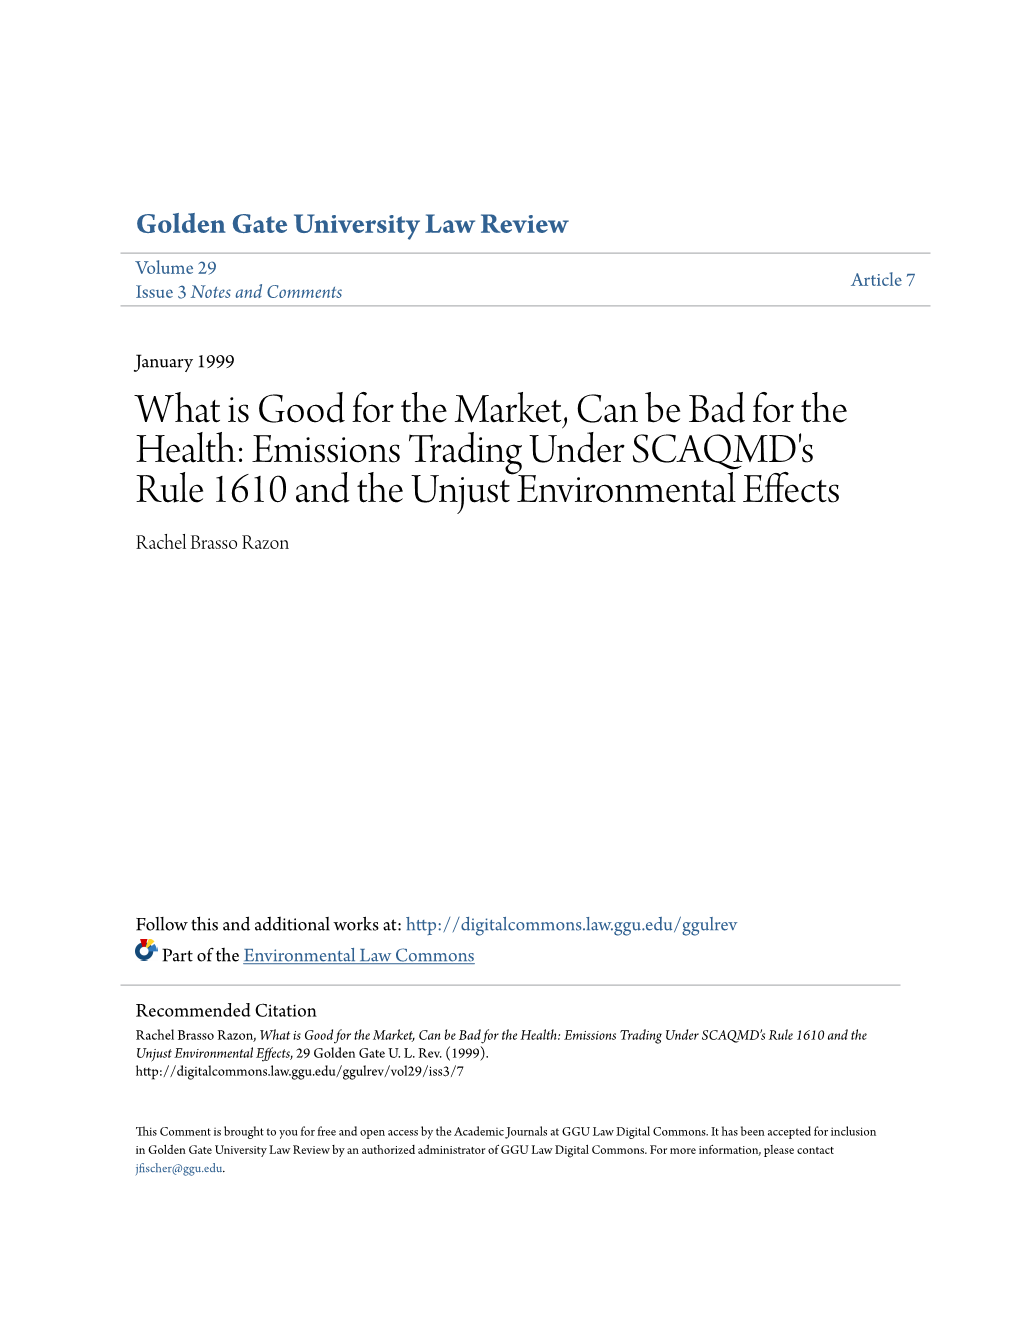 What Is Good for the Market, Can Be Bad for the Health: Emissions Trading Under SCAQMD's Rule 1610 and the Unjust Environmental Effects Rachel Brasso Razon